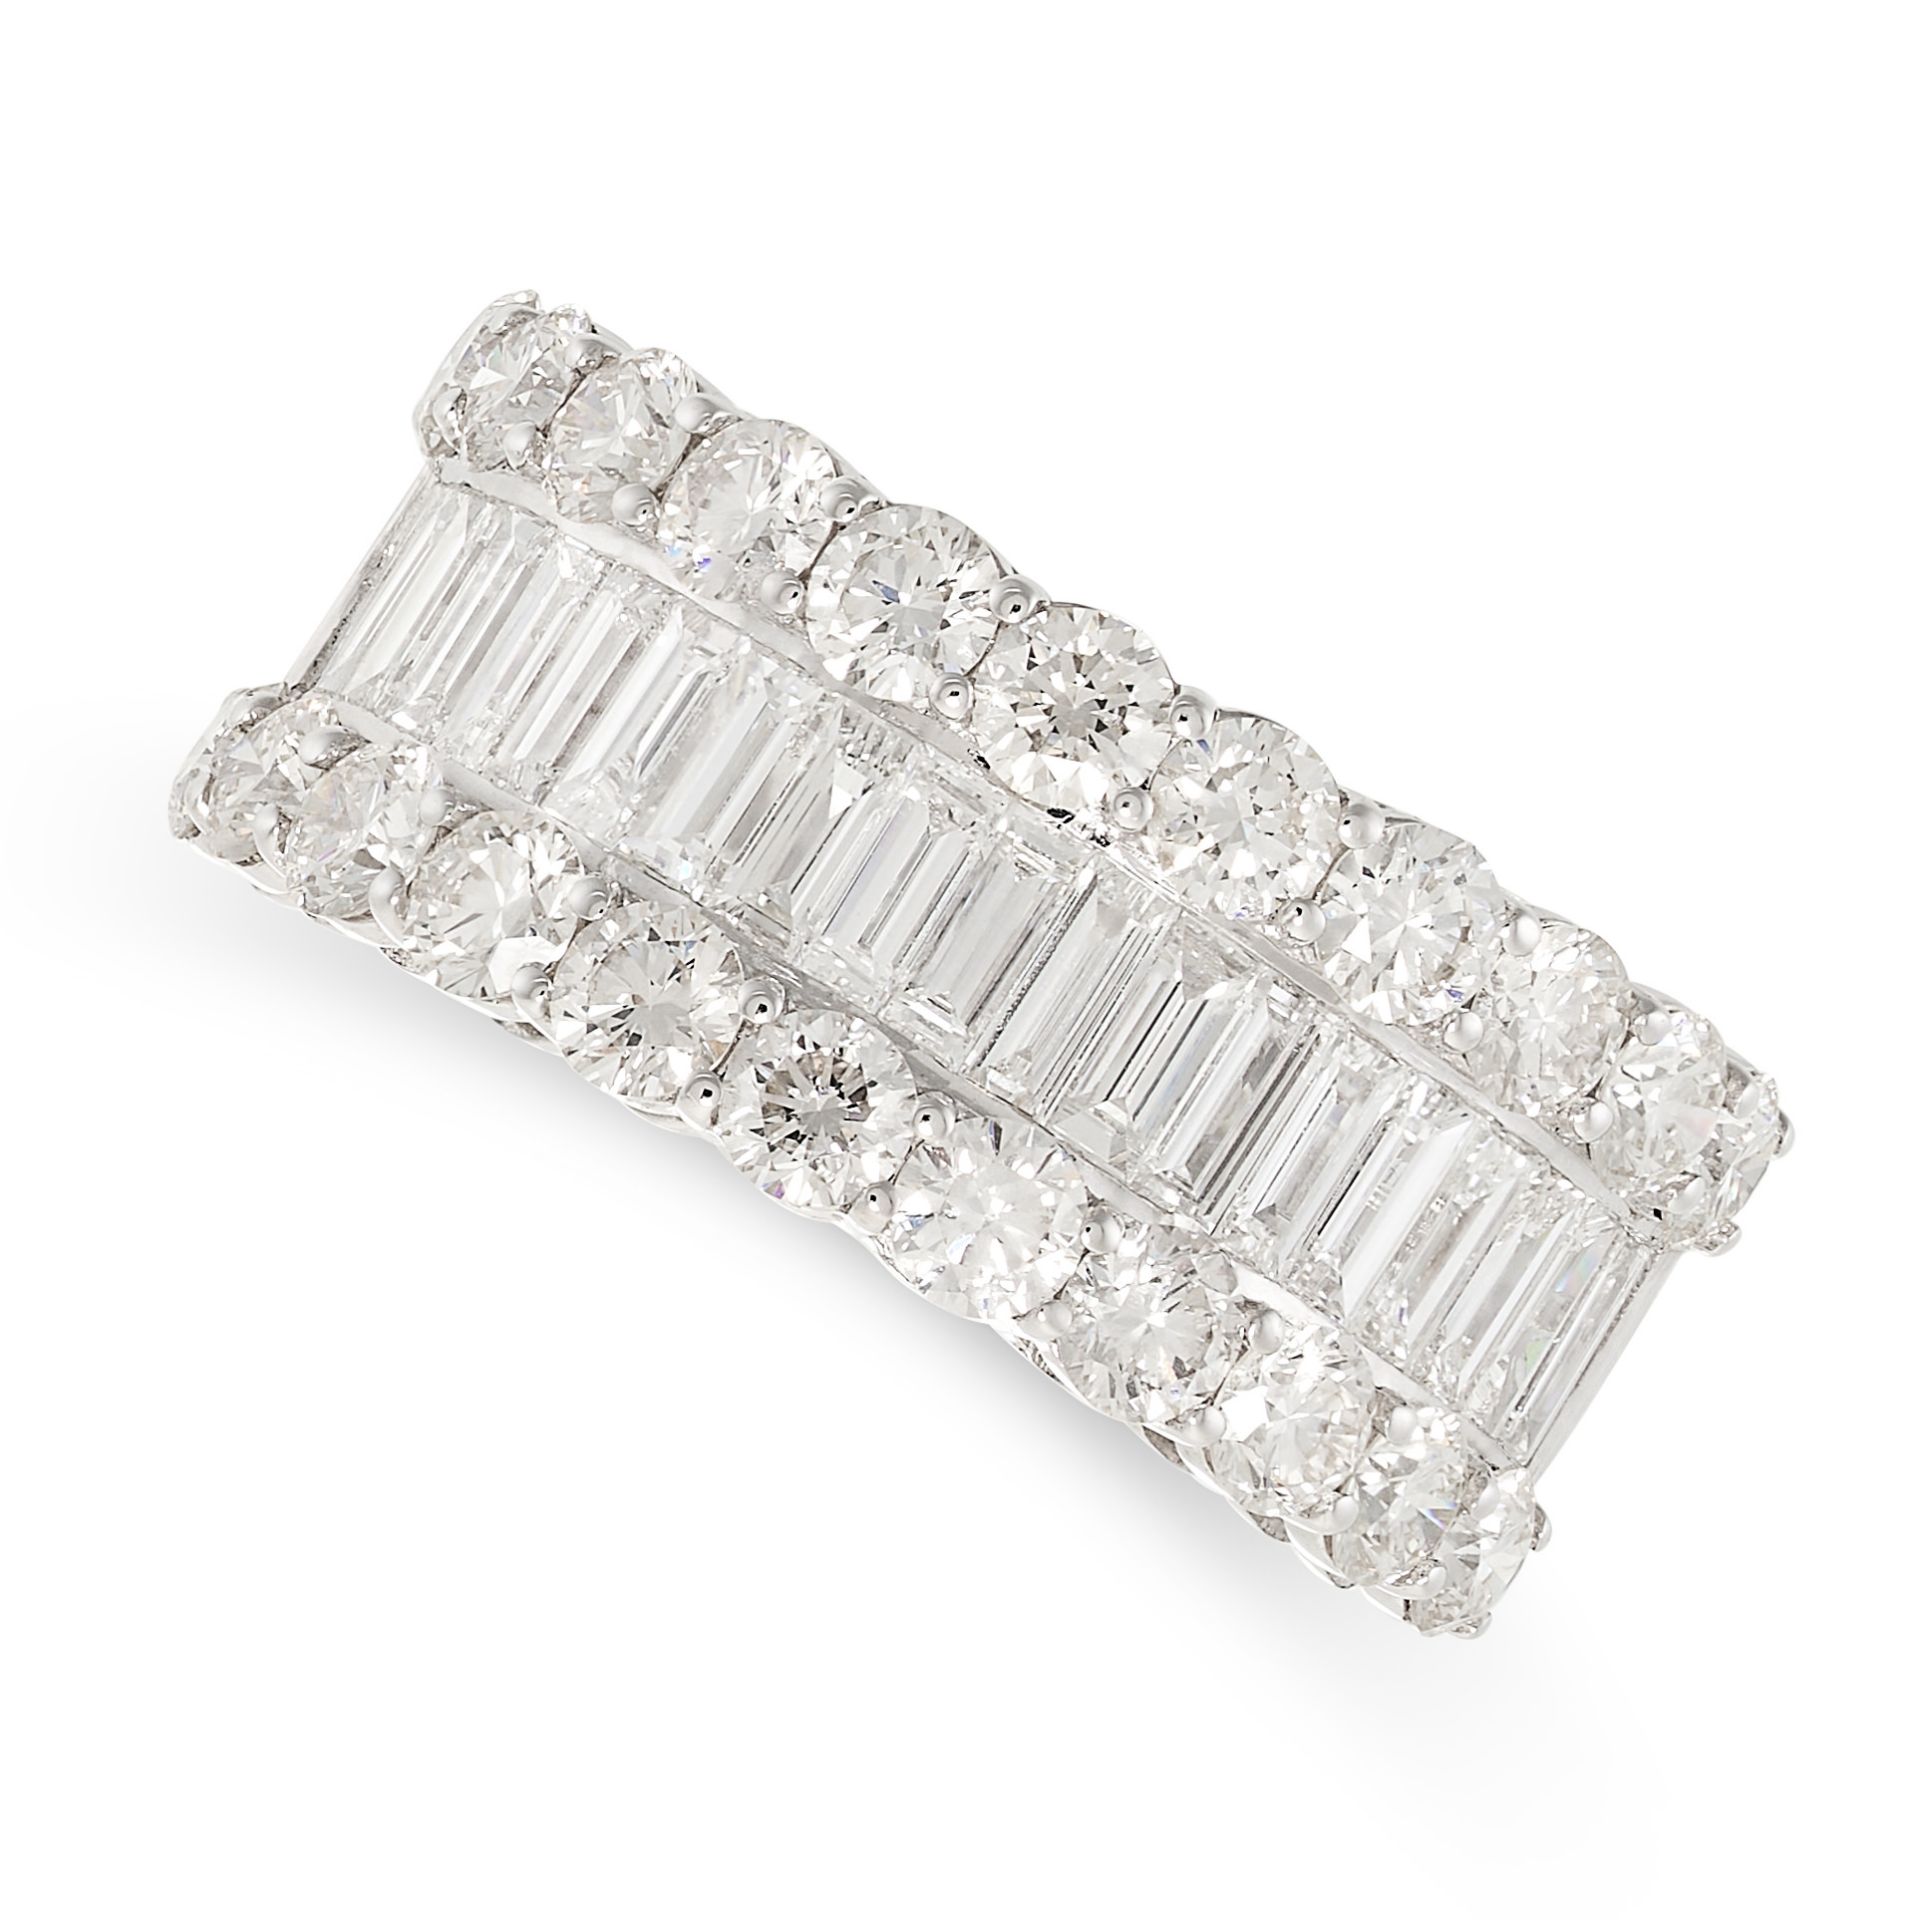 A DIAMOND HALF ETERNITY RING in 18ct white gold, the band half set with a row of baguette cut